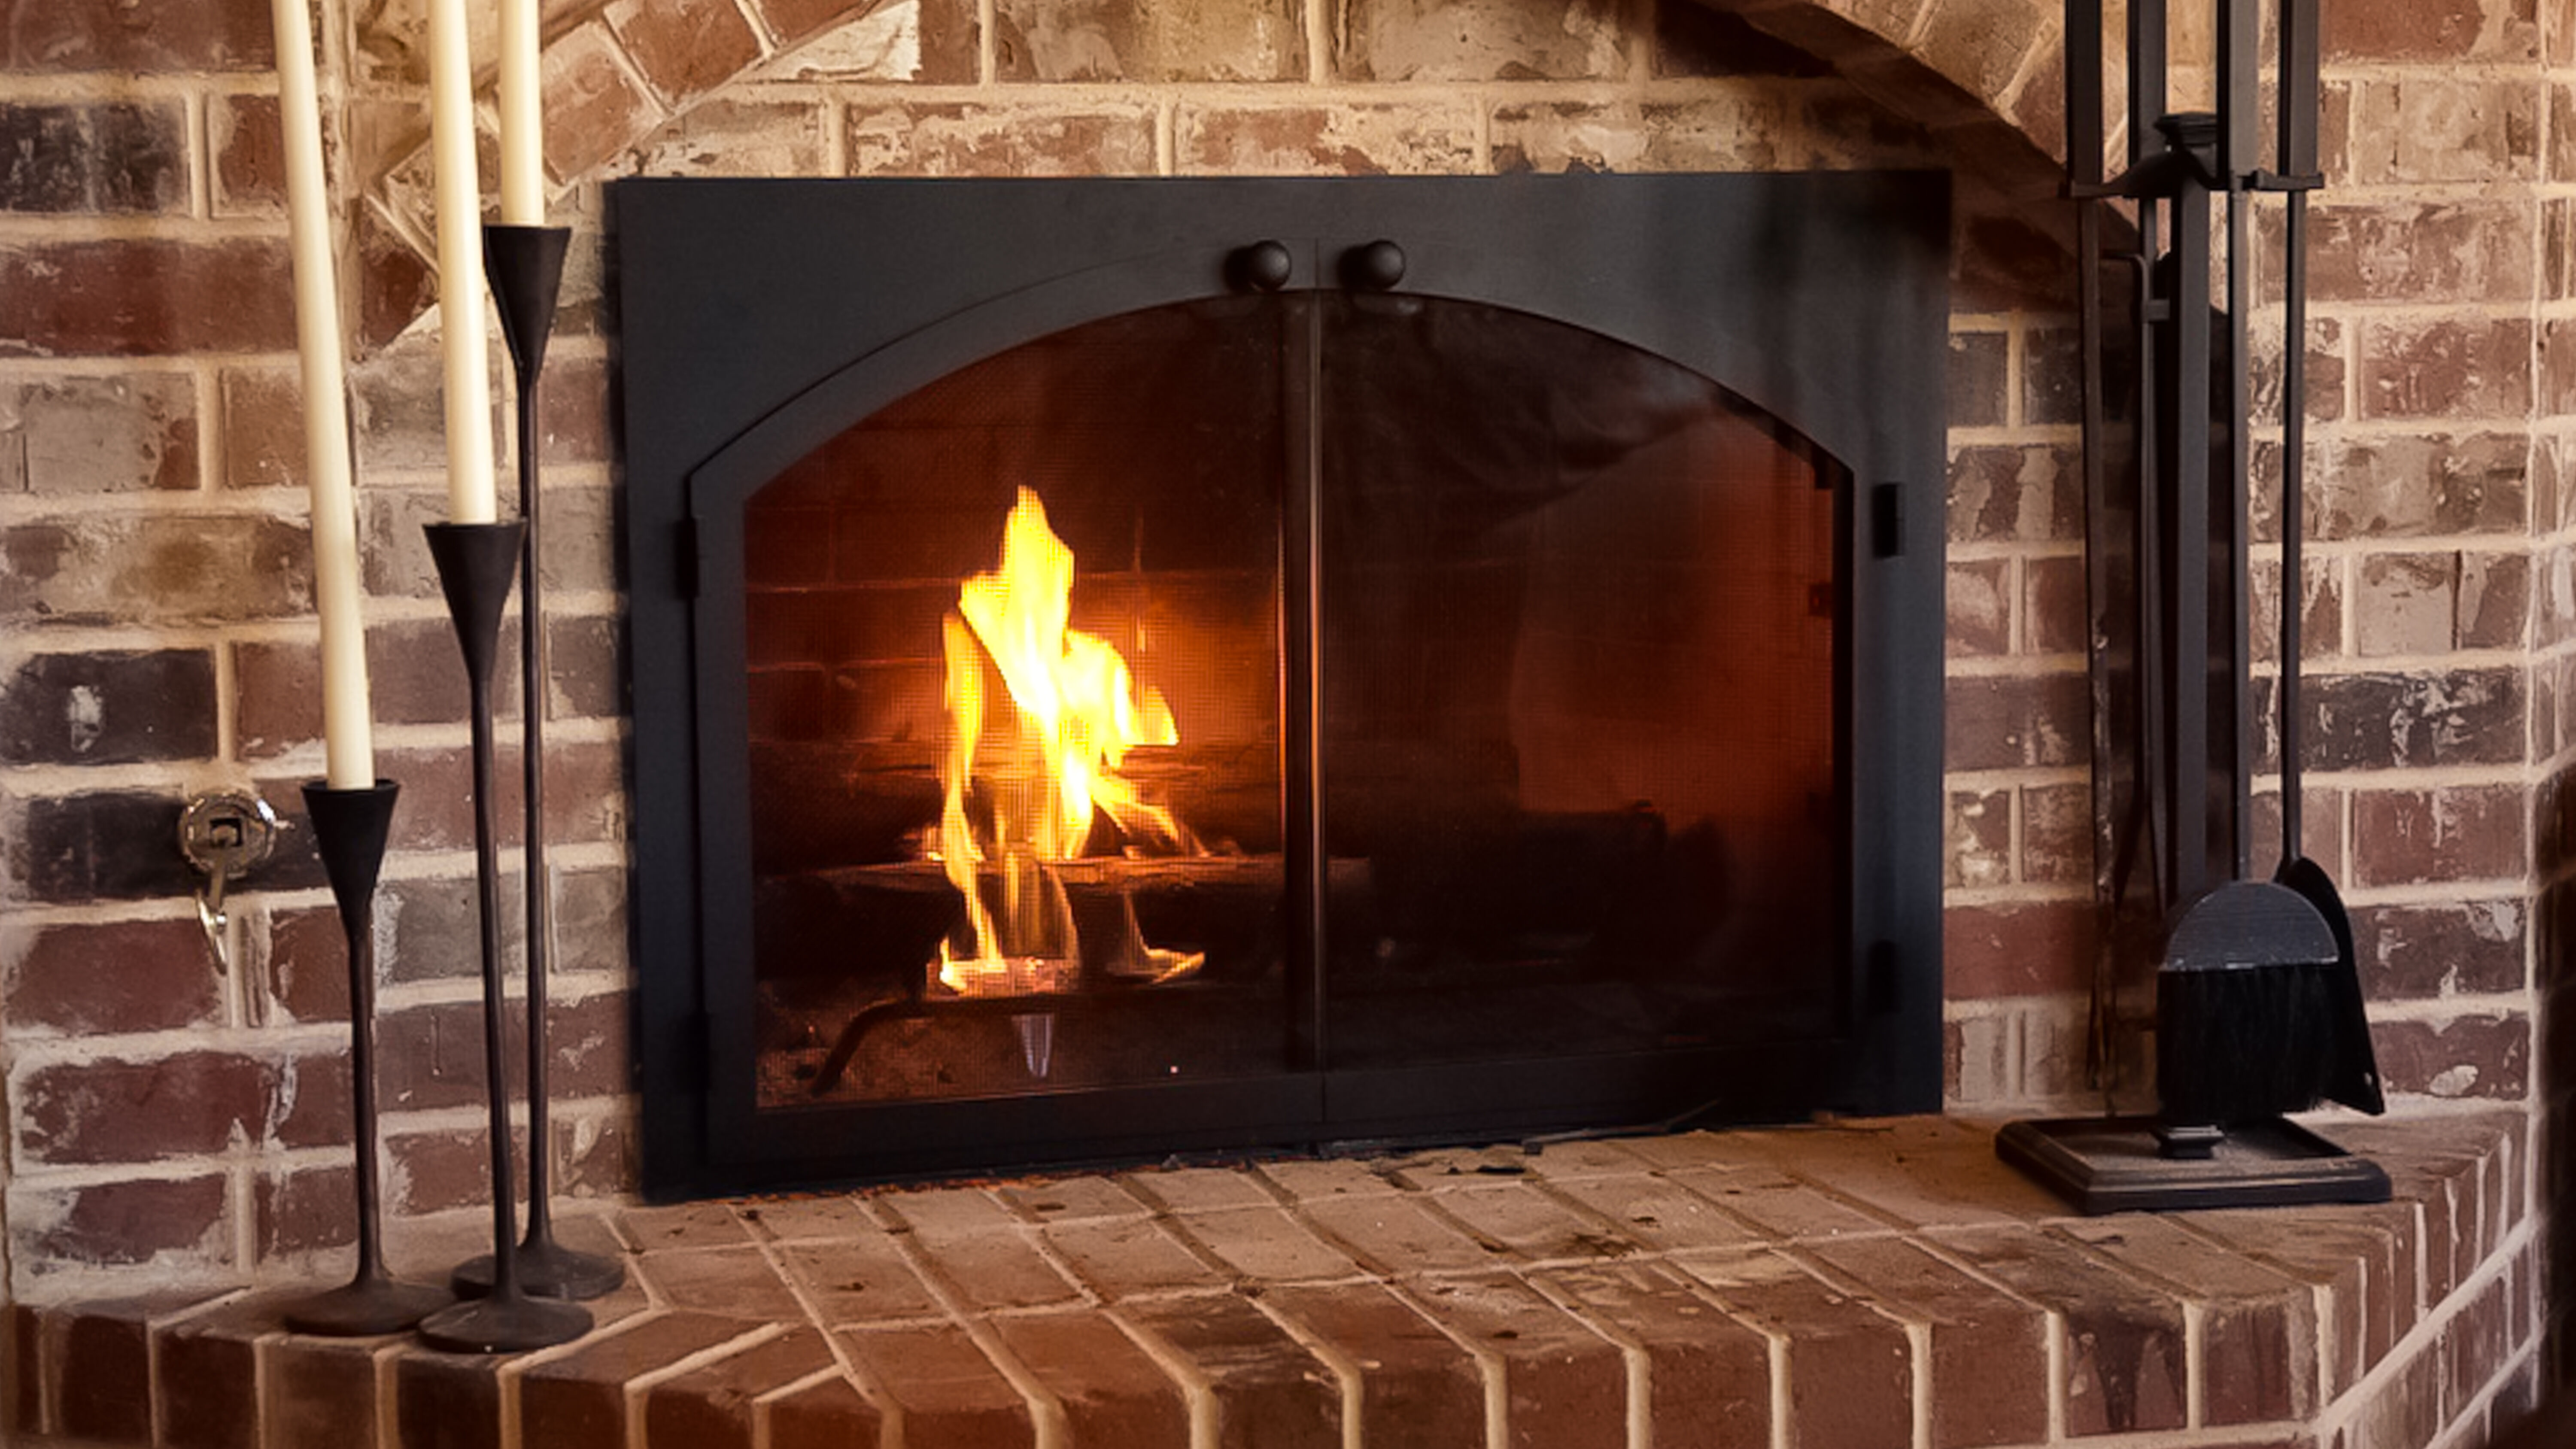 A traditional masonry hearth with a wood burning fireplace, black cast iron fireplace doors, and black fireplace tools.